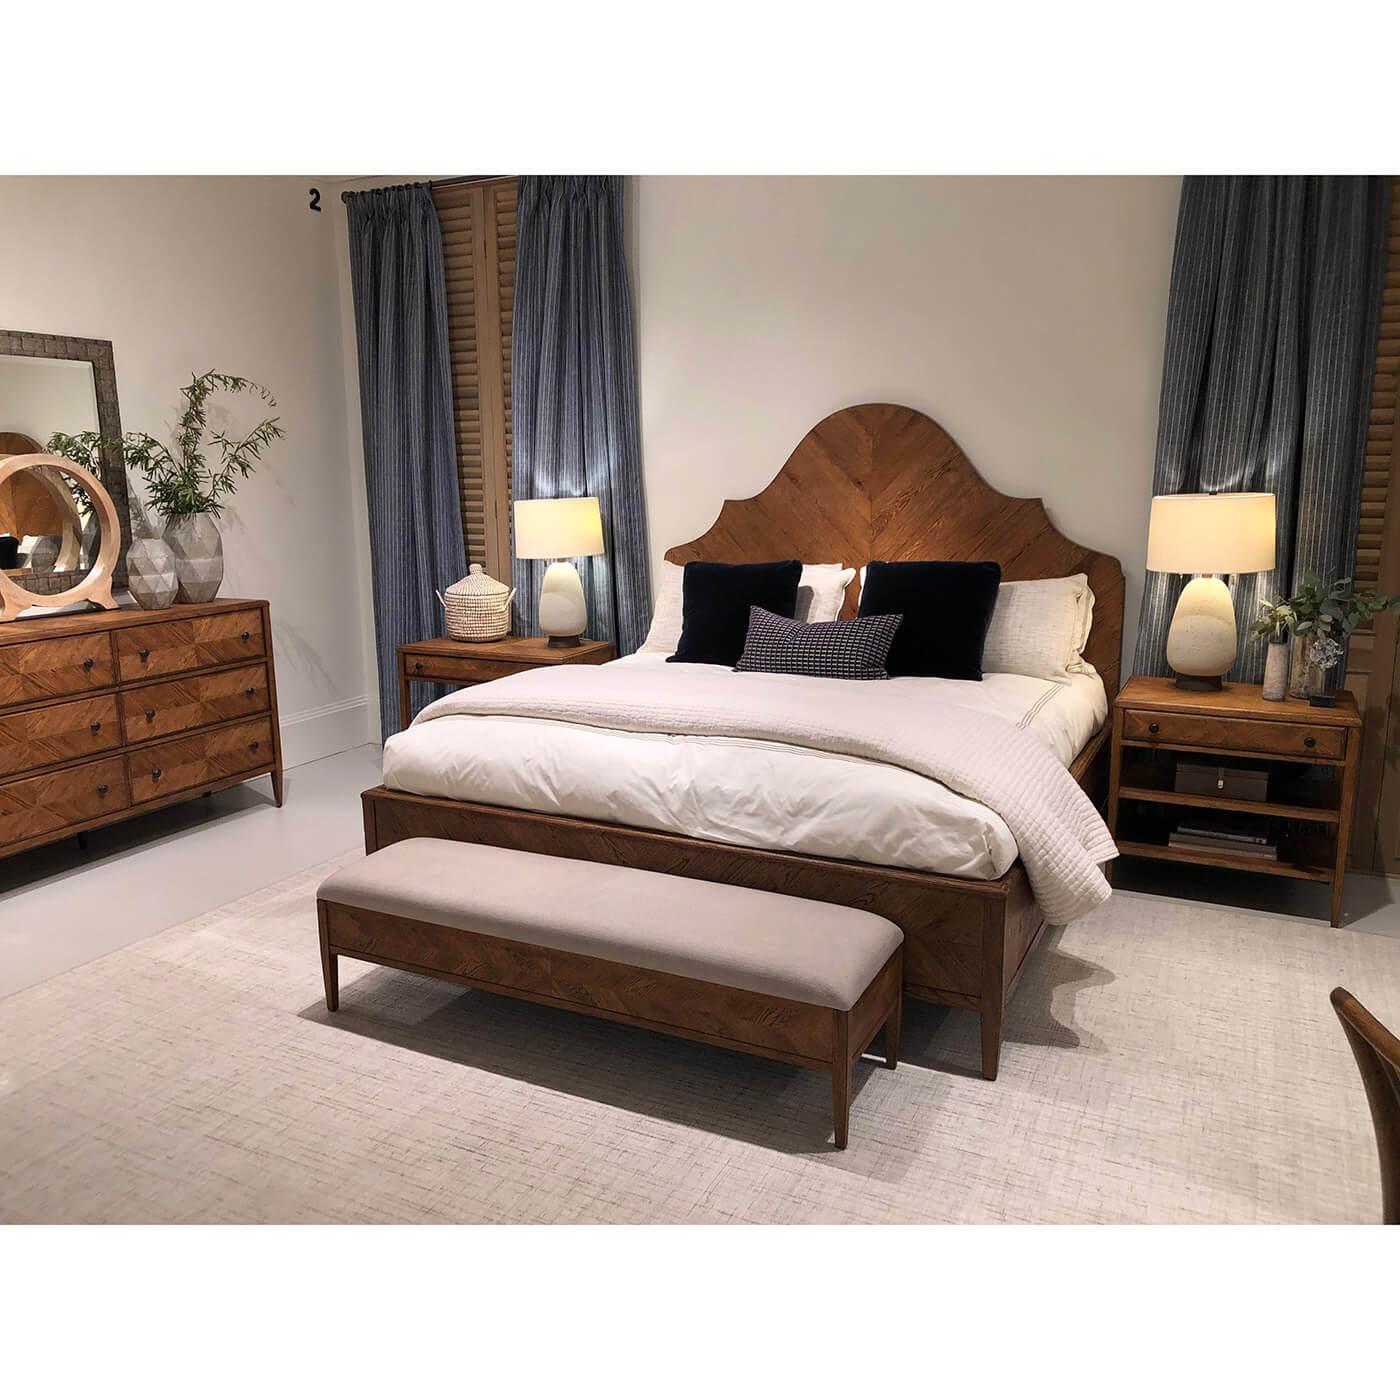 Arch herringbone designed headboard and mirrored herringbone parquetry highlight the beautiful craftsmanship and design of this bed.

Dimensions: 77.25